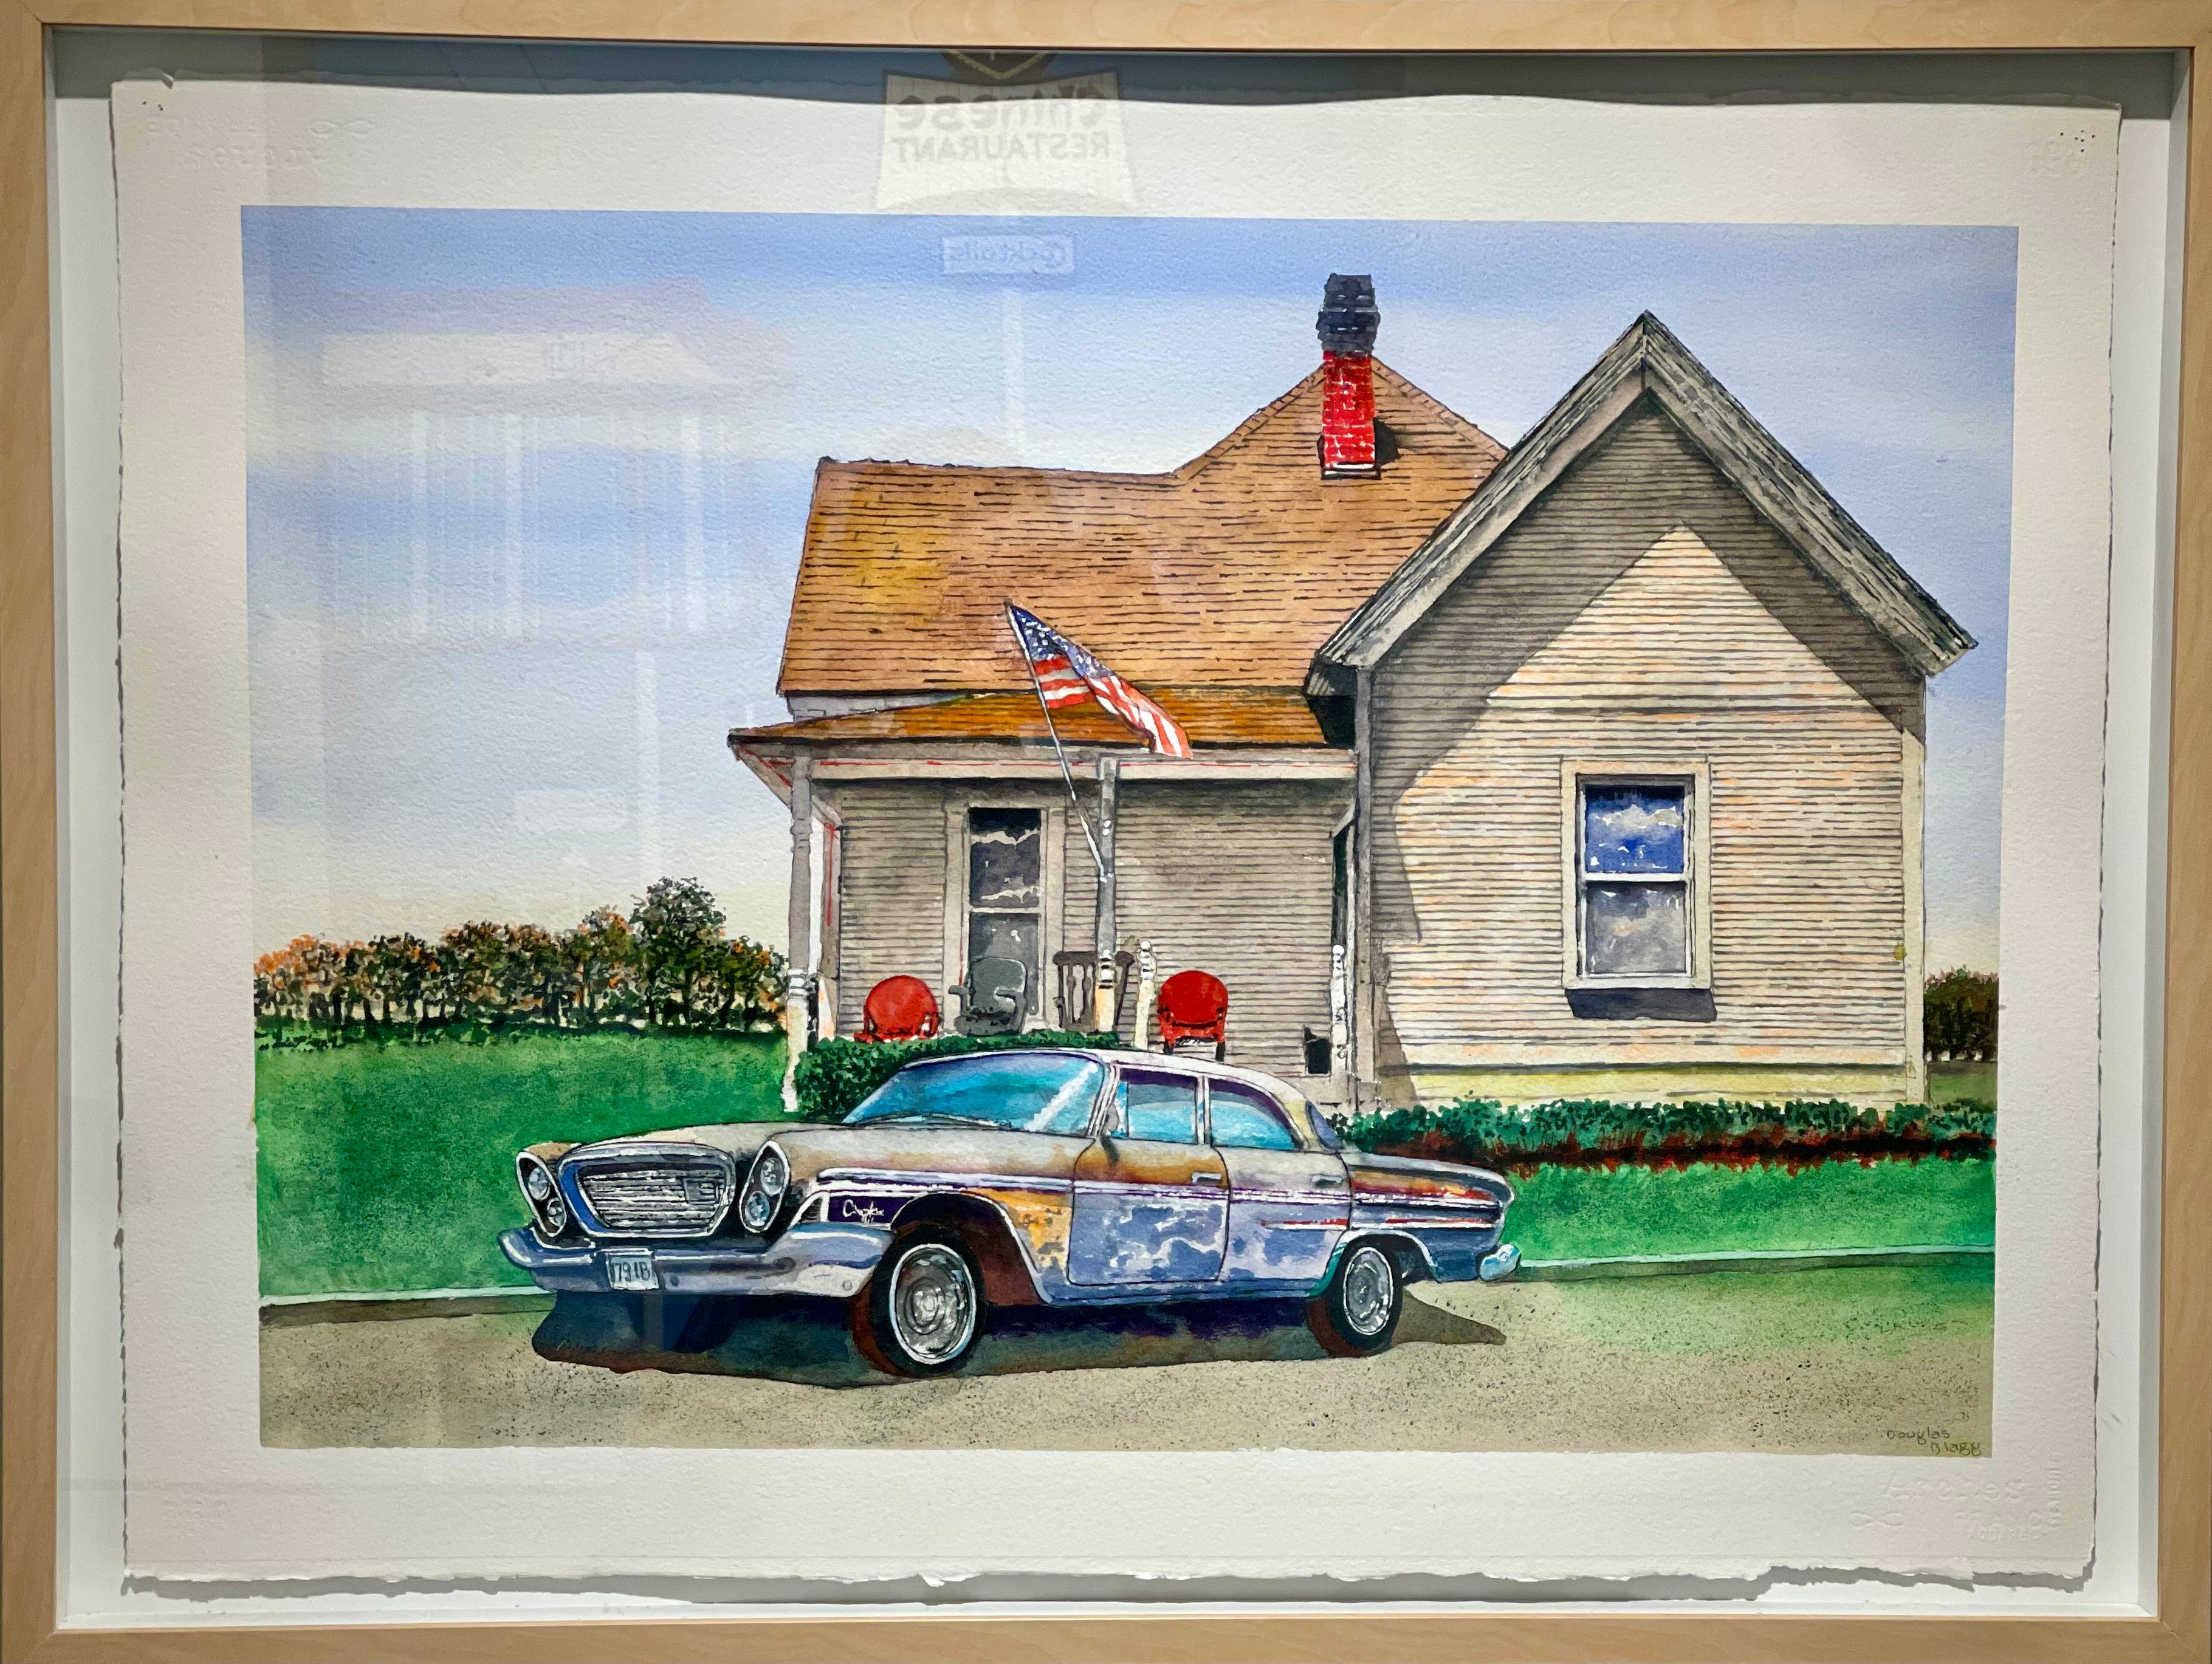 'Northside,' 2021 by Doug Blagg. Watercolor on paper. 26 x 34.